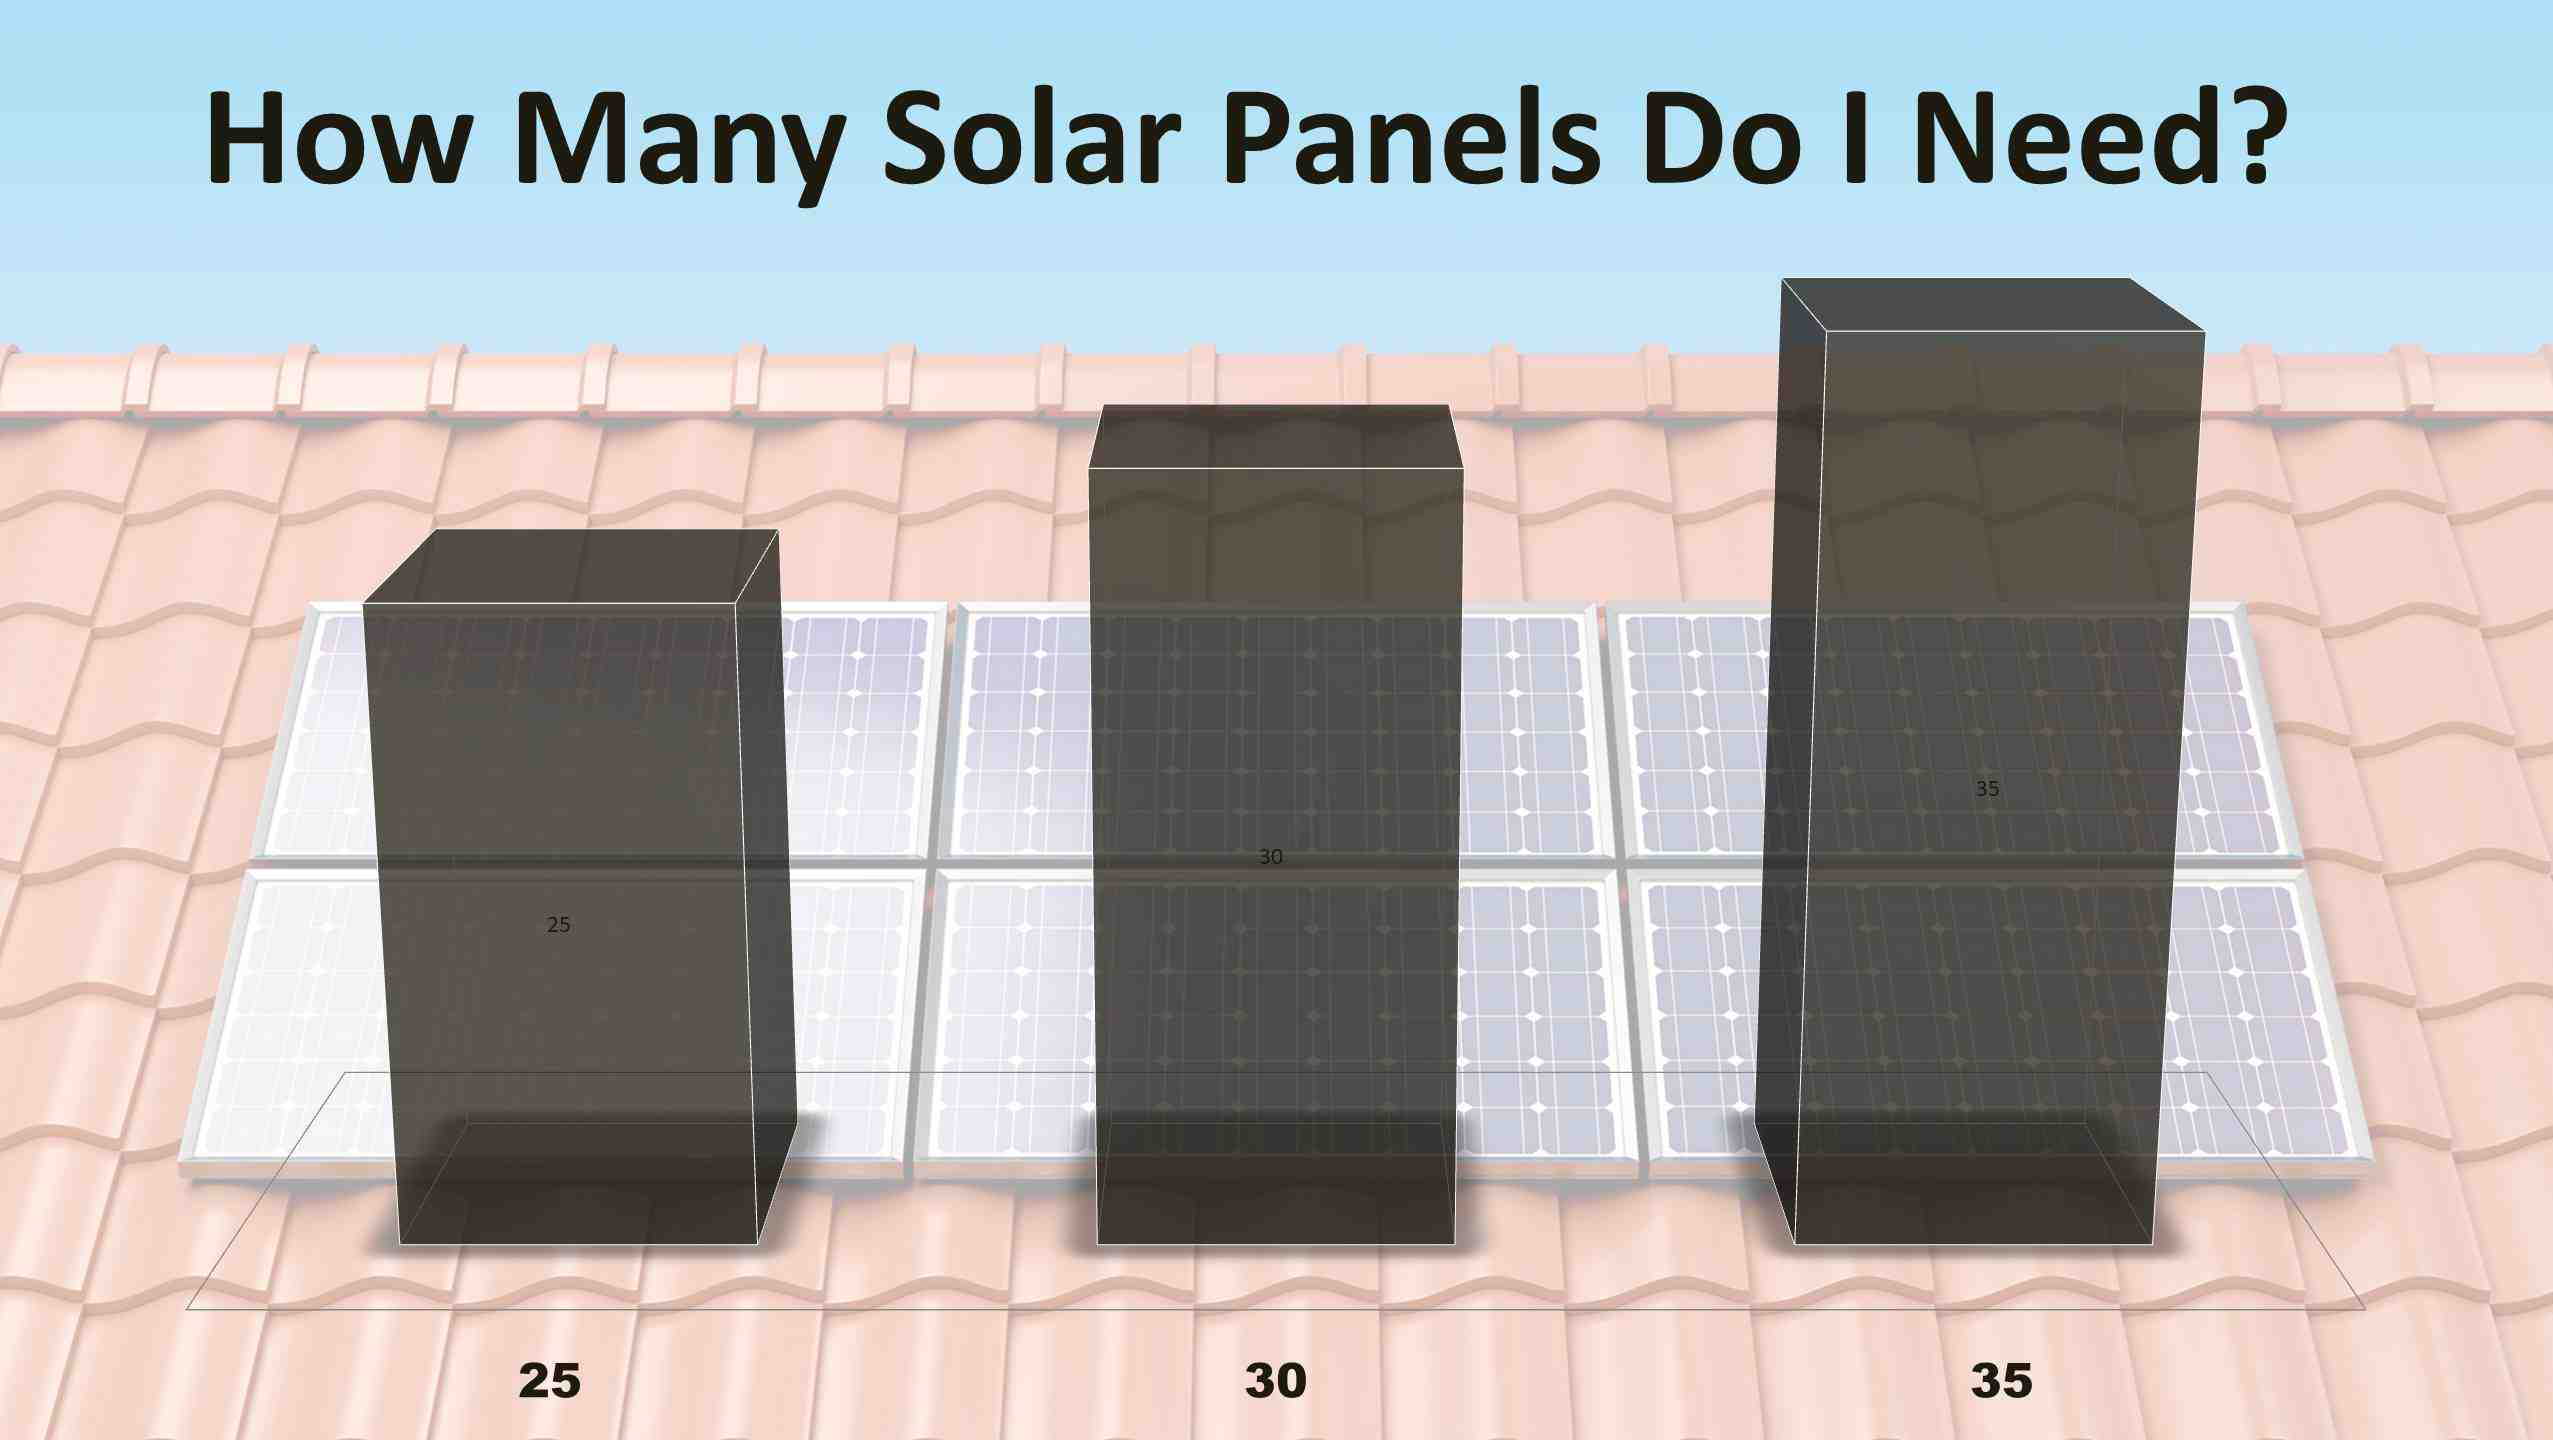 How much does it cost to install solar panels?